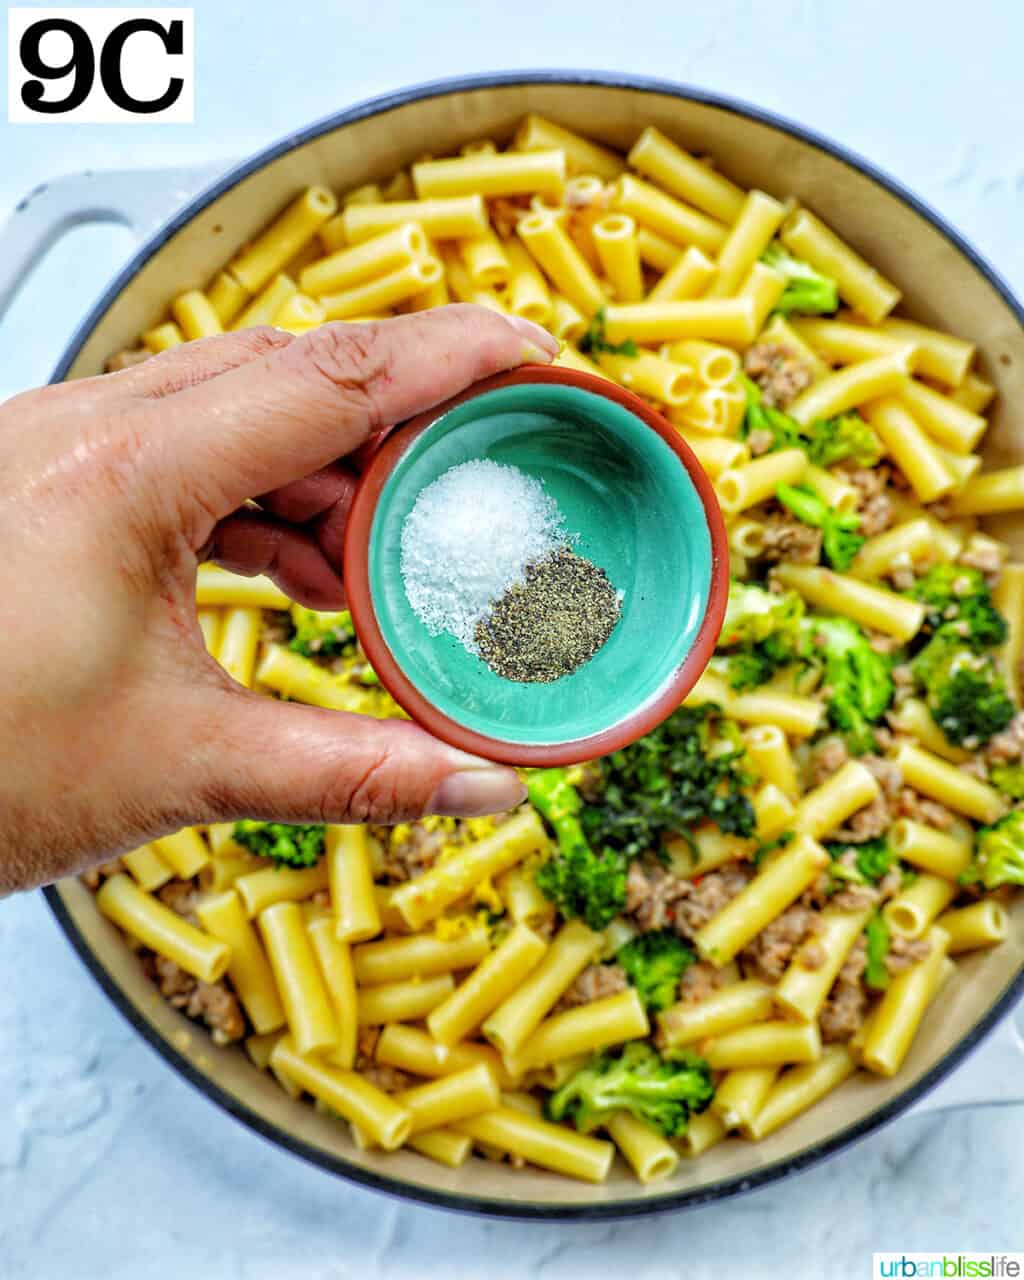 hand holding bowl of salt and pepper over a skillet of broccoli and Italian sausage.